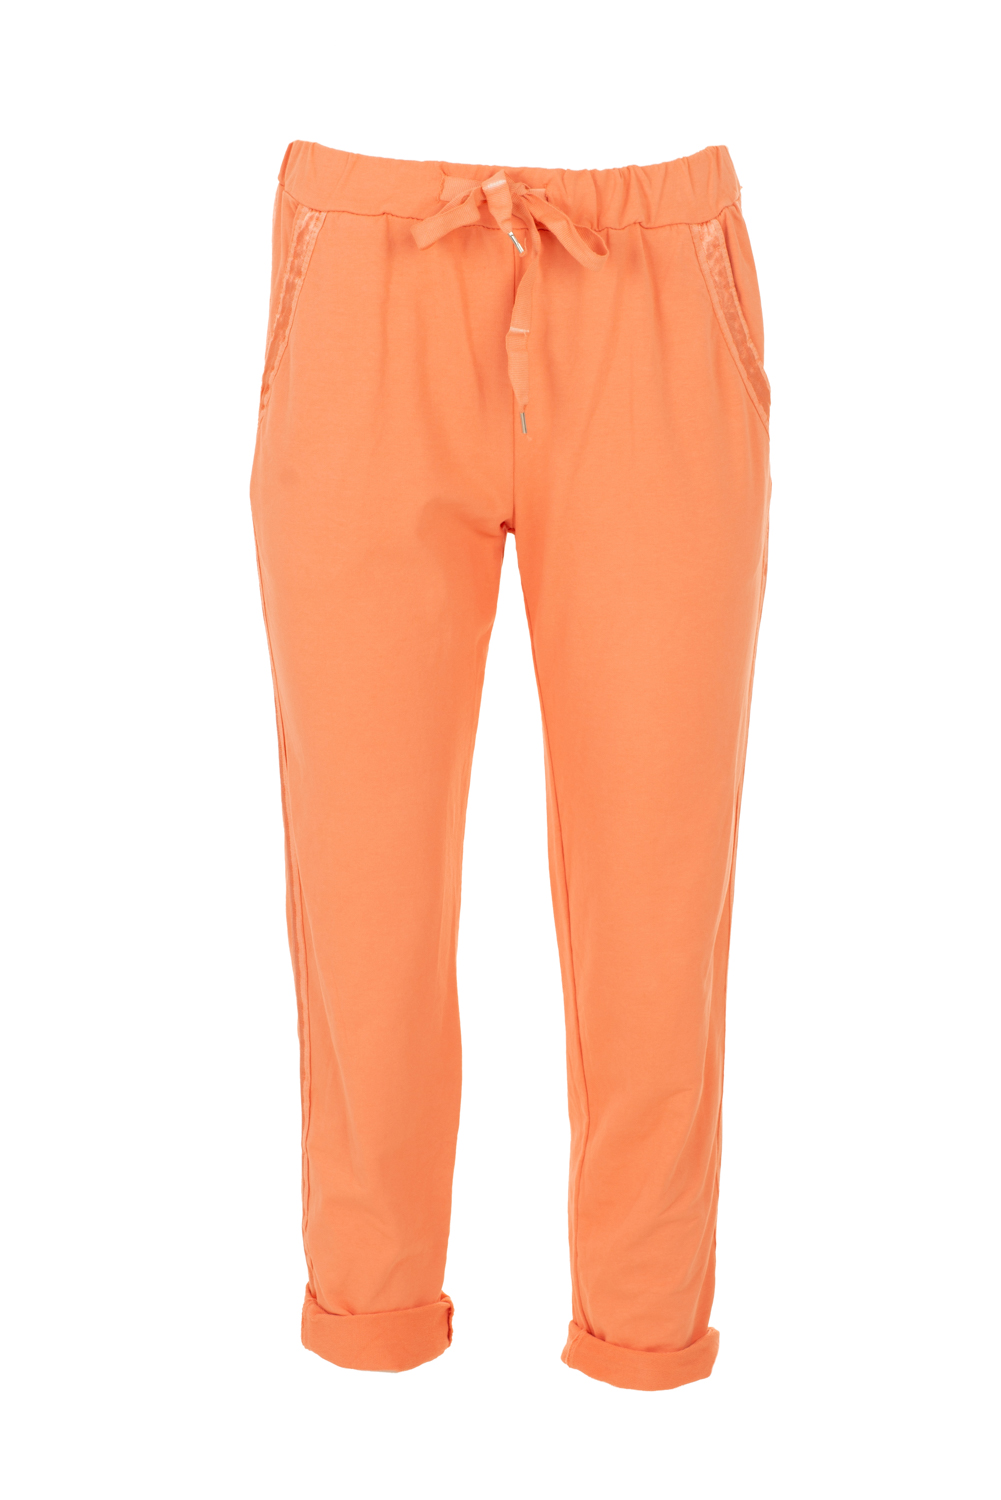 Image of Sweatpants with Drawstring,Pockets and Side Satin Piping